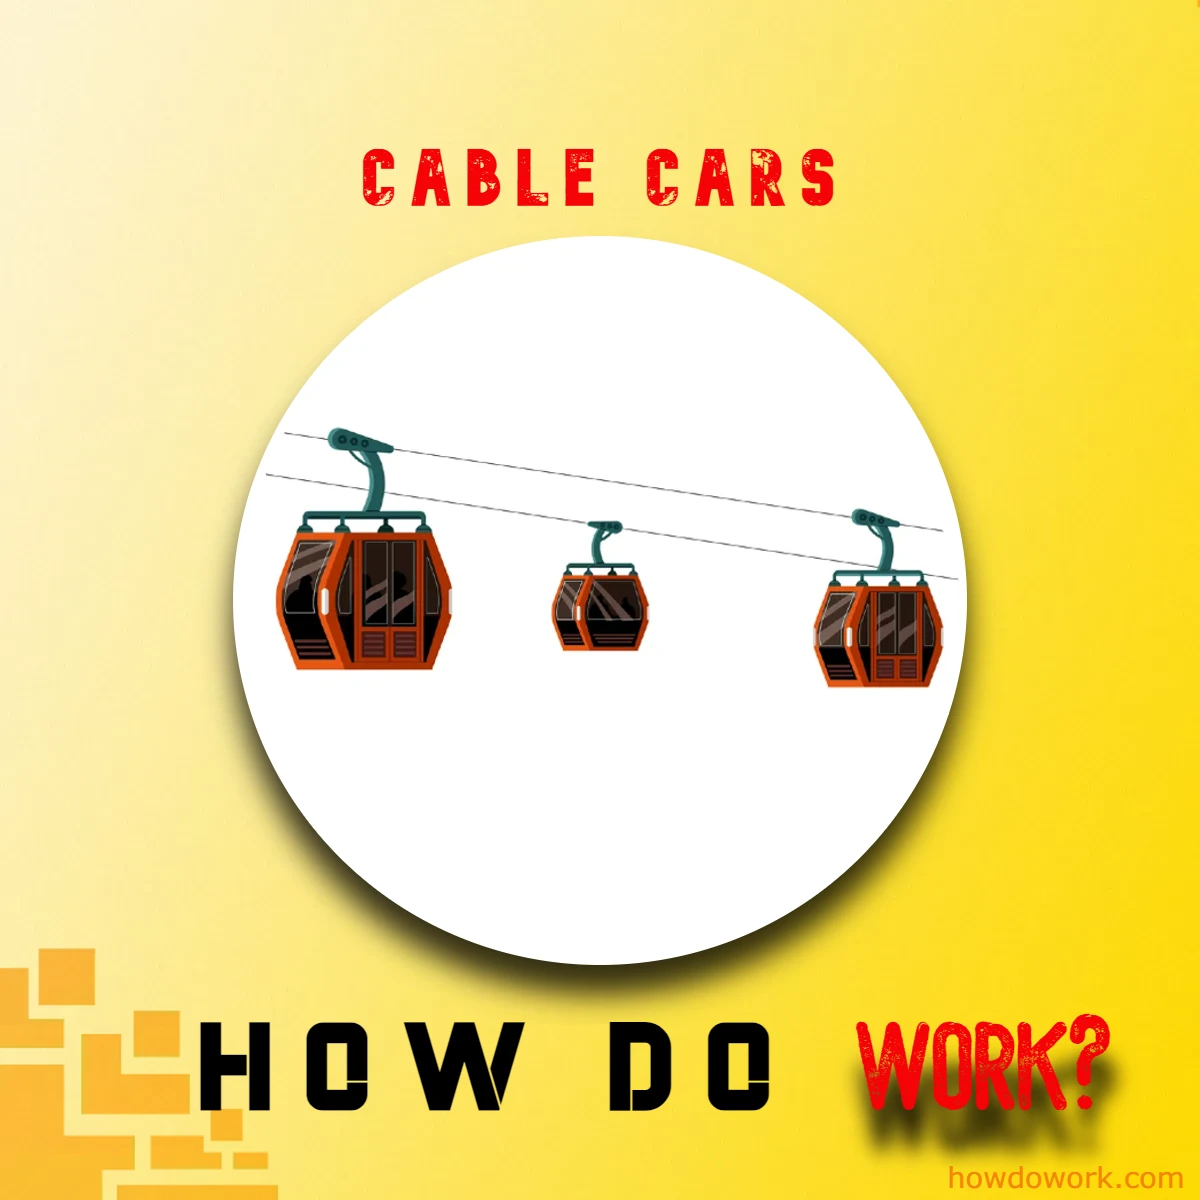 How Do Cable Cars Work